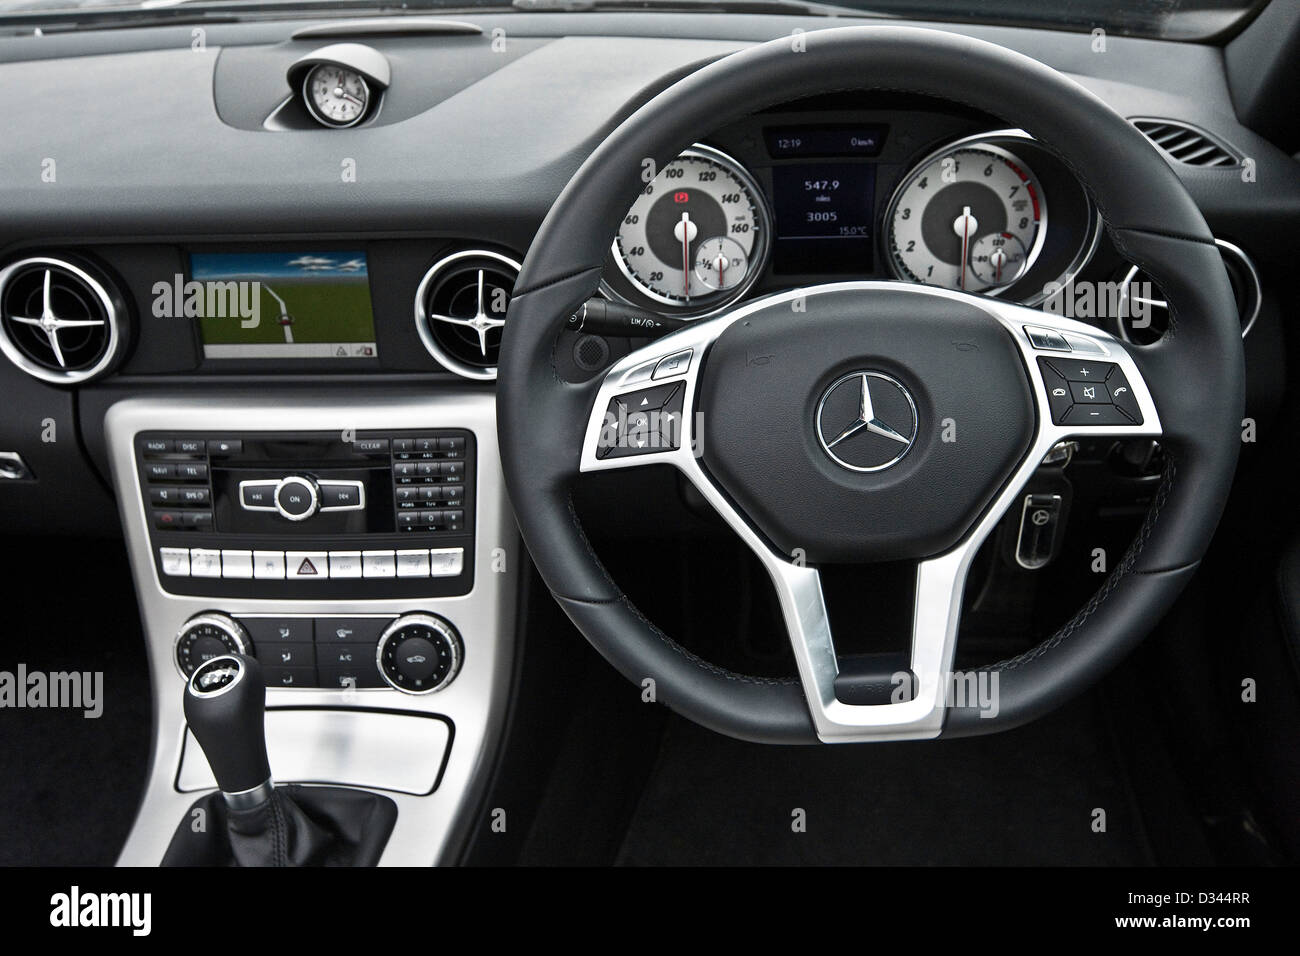 Dashboard and steering wheel in the Mercedes SLK 200 convertible, Pickering, UK, 28 06 2011 Stock Photo